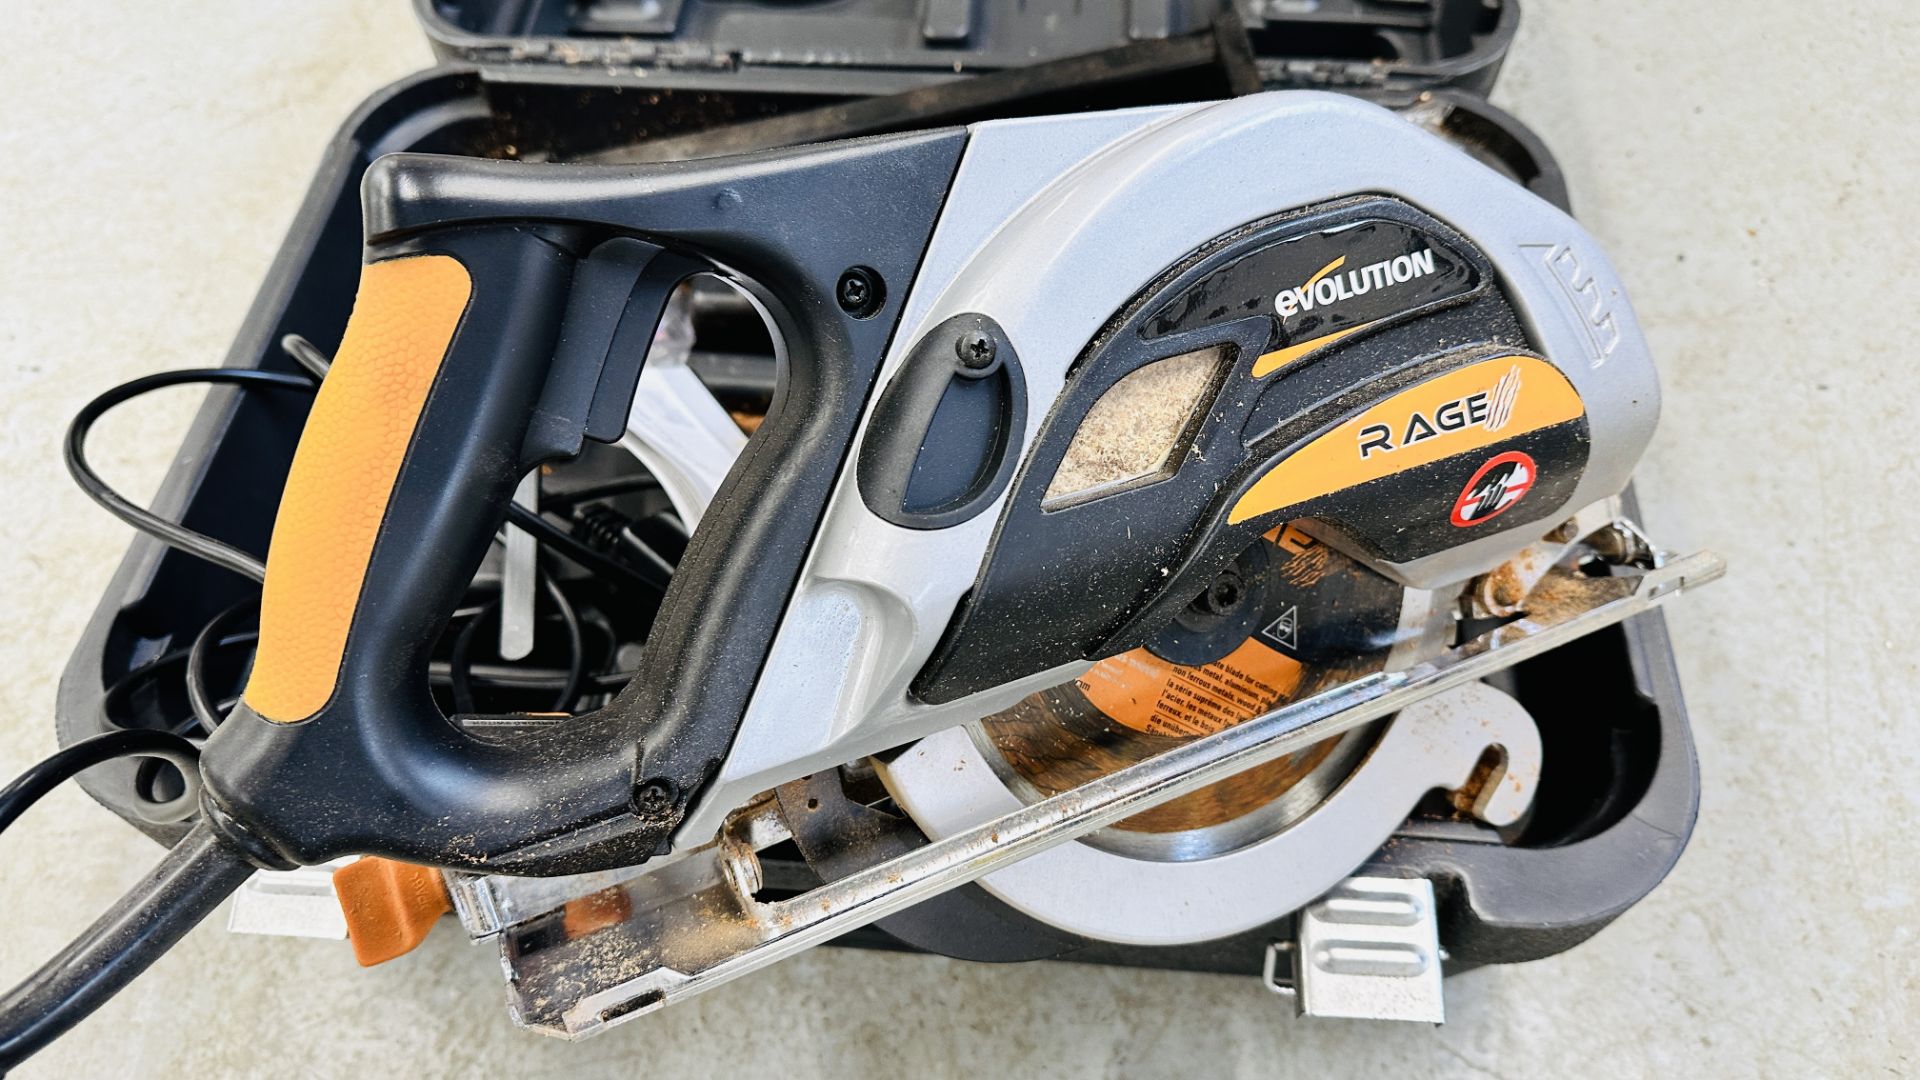 CASED EVOLUTION RAGE CIRCULAR SAW - SOLD AS SEEN. - Image 2 of 6